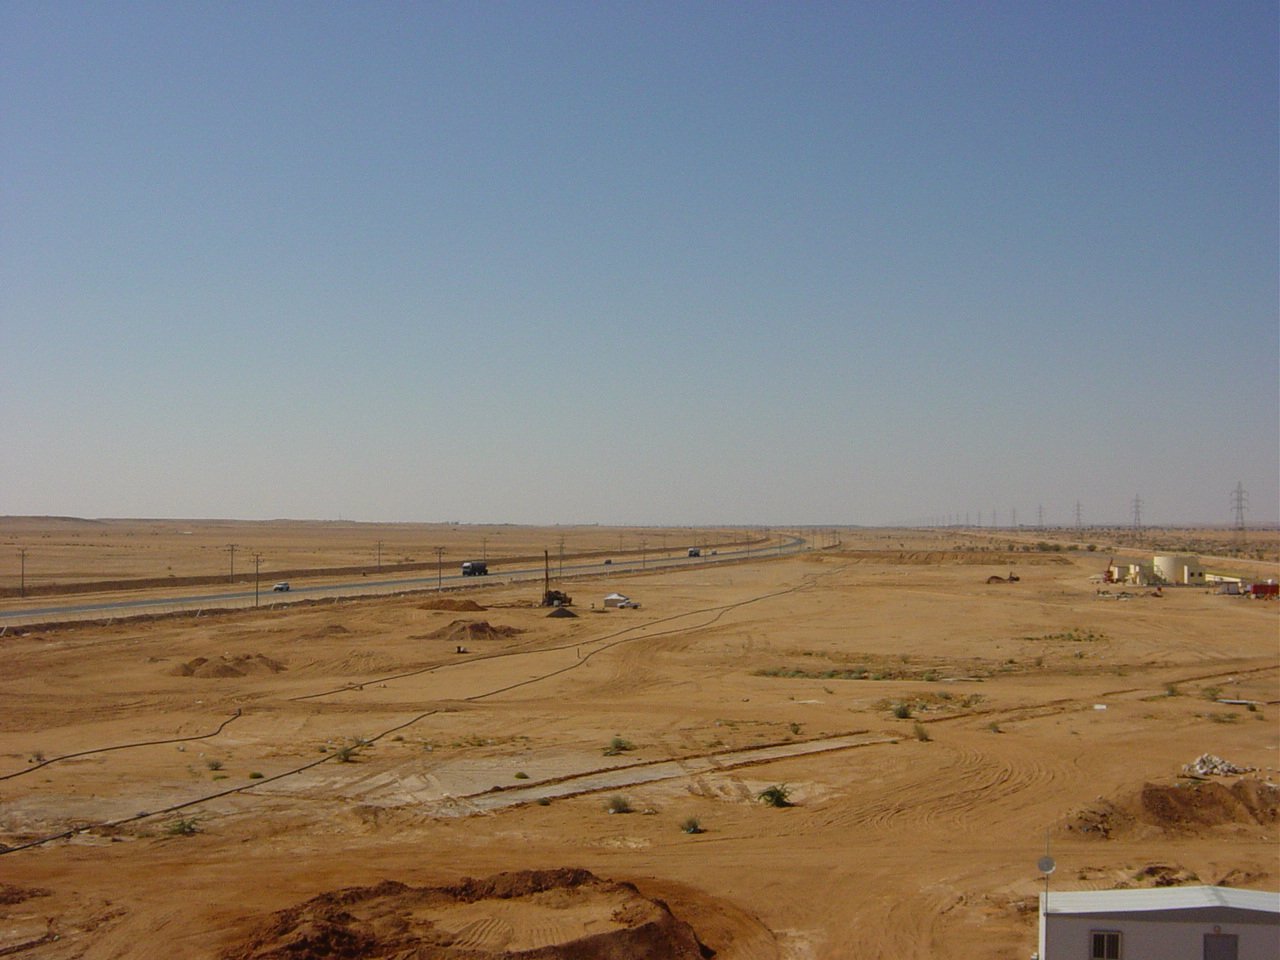 large dirt field area with road in the distance